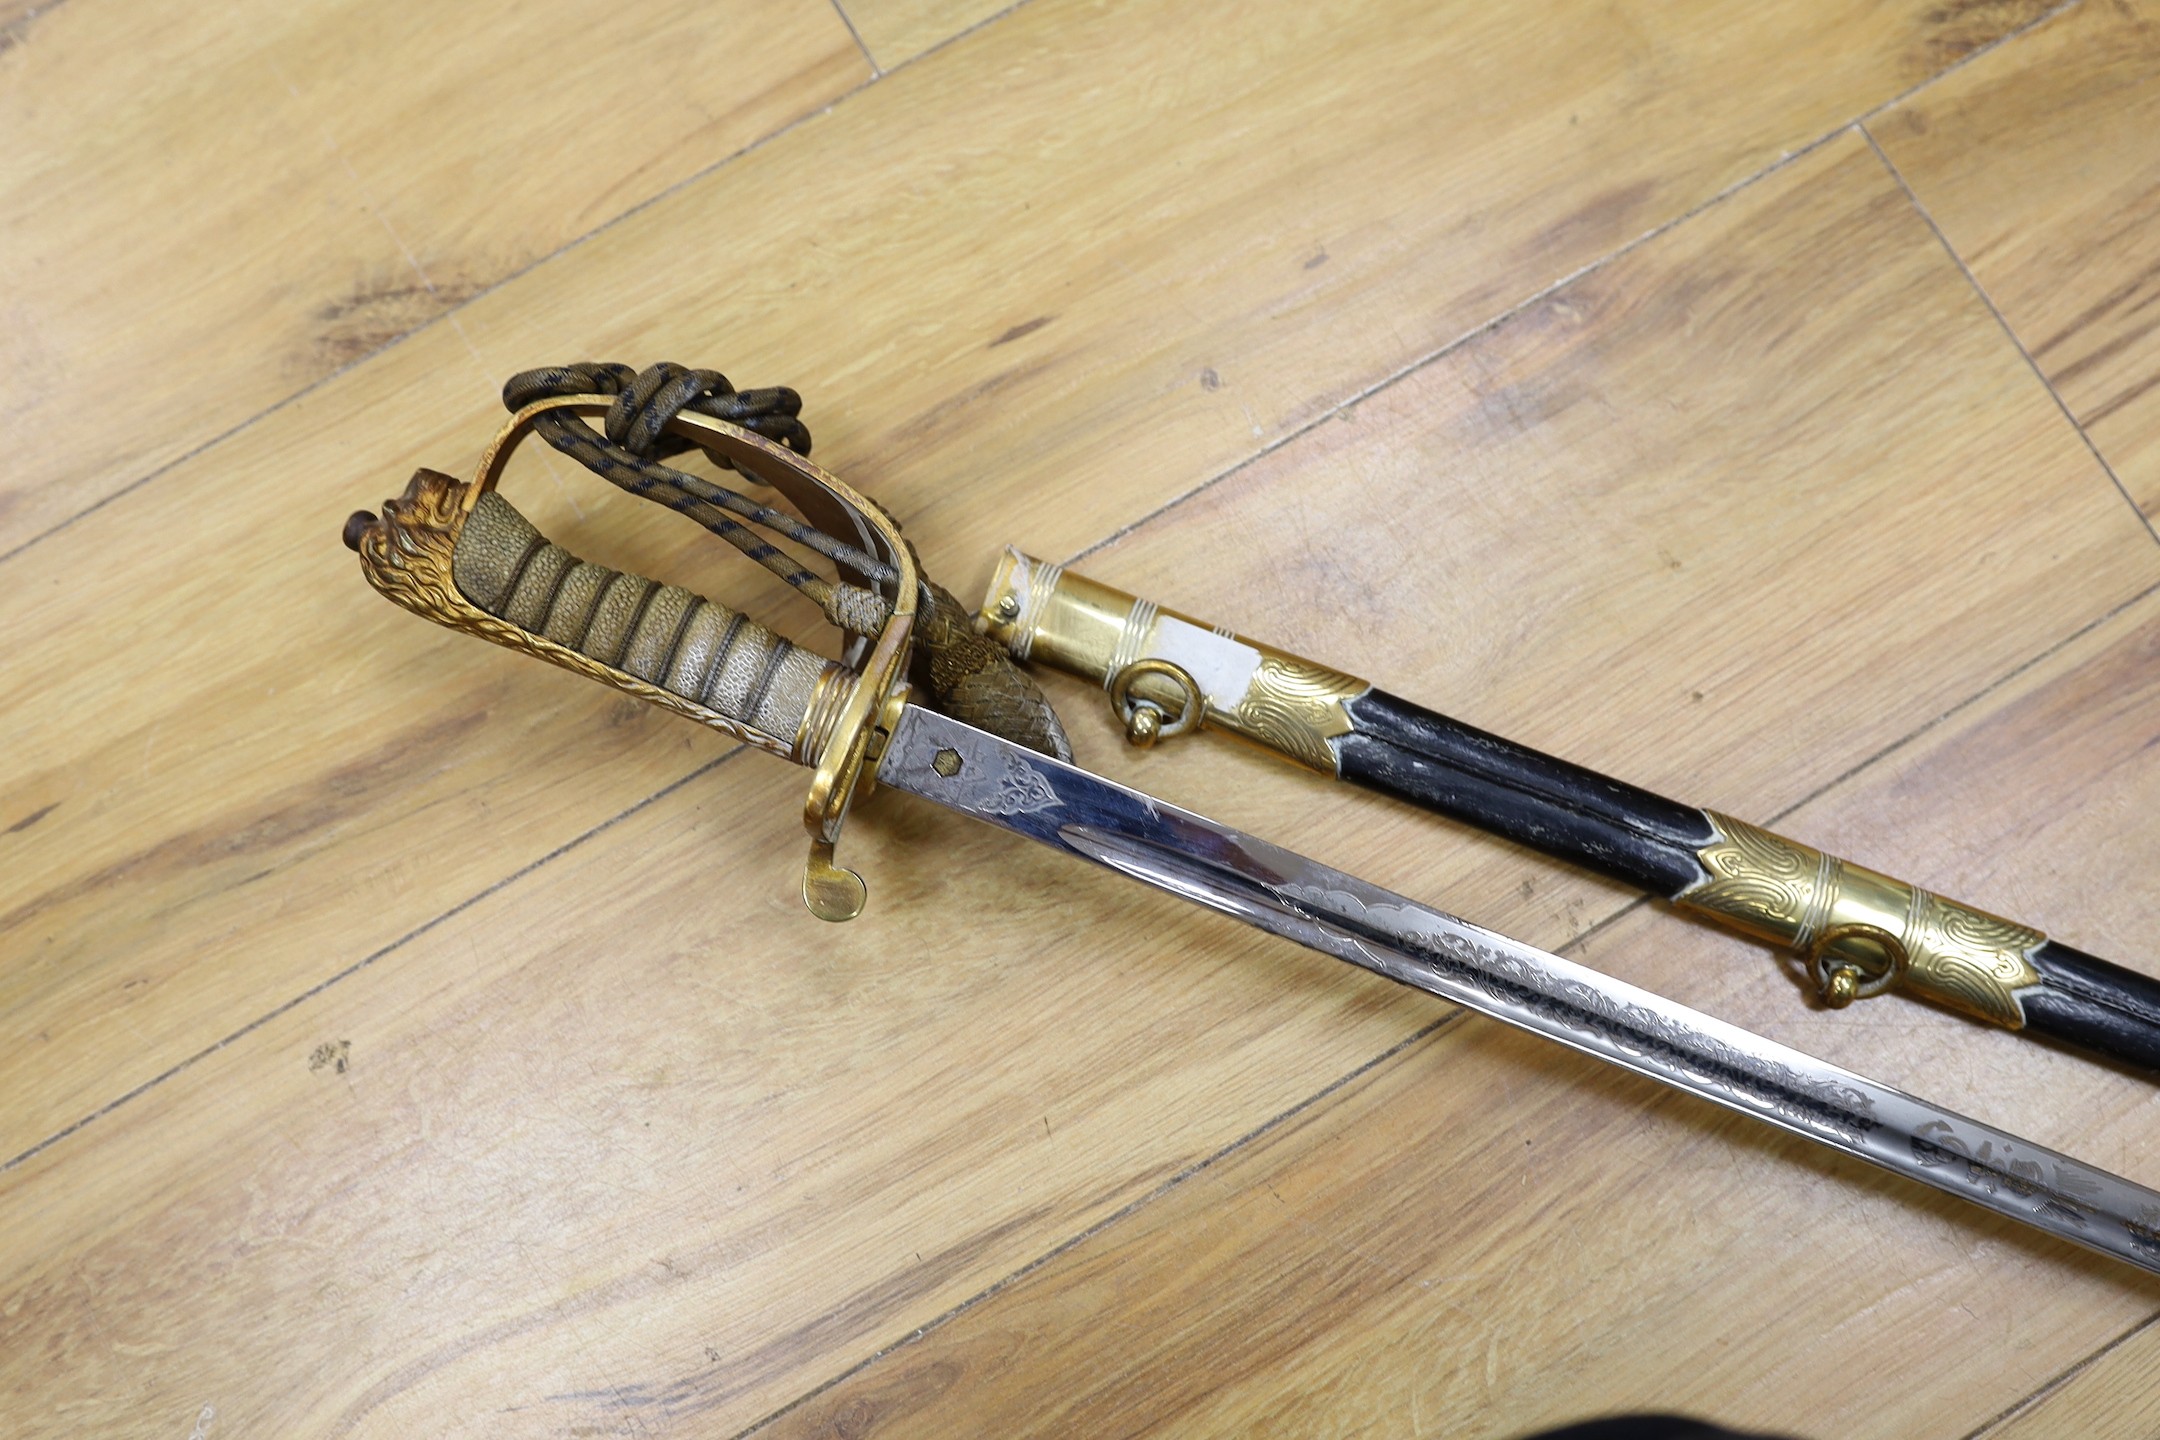 A QEII Naval officer's dress sword and scabbard